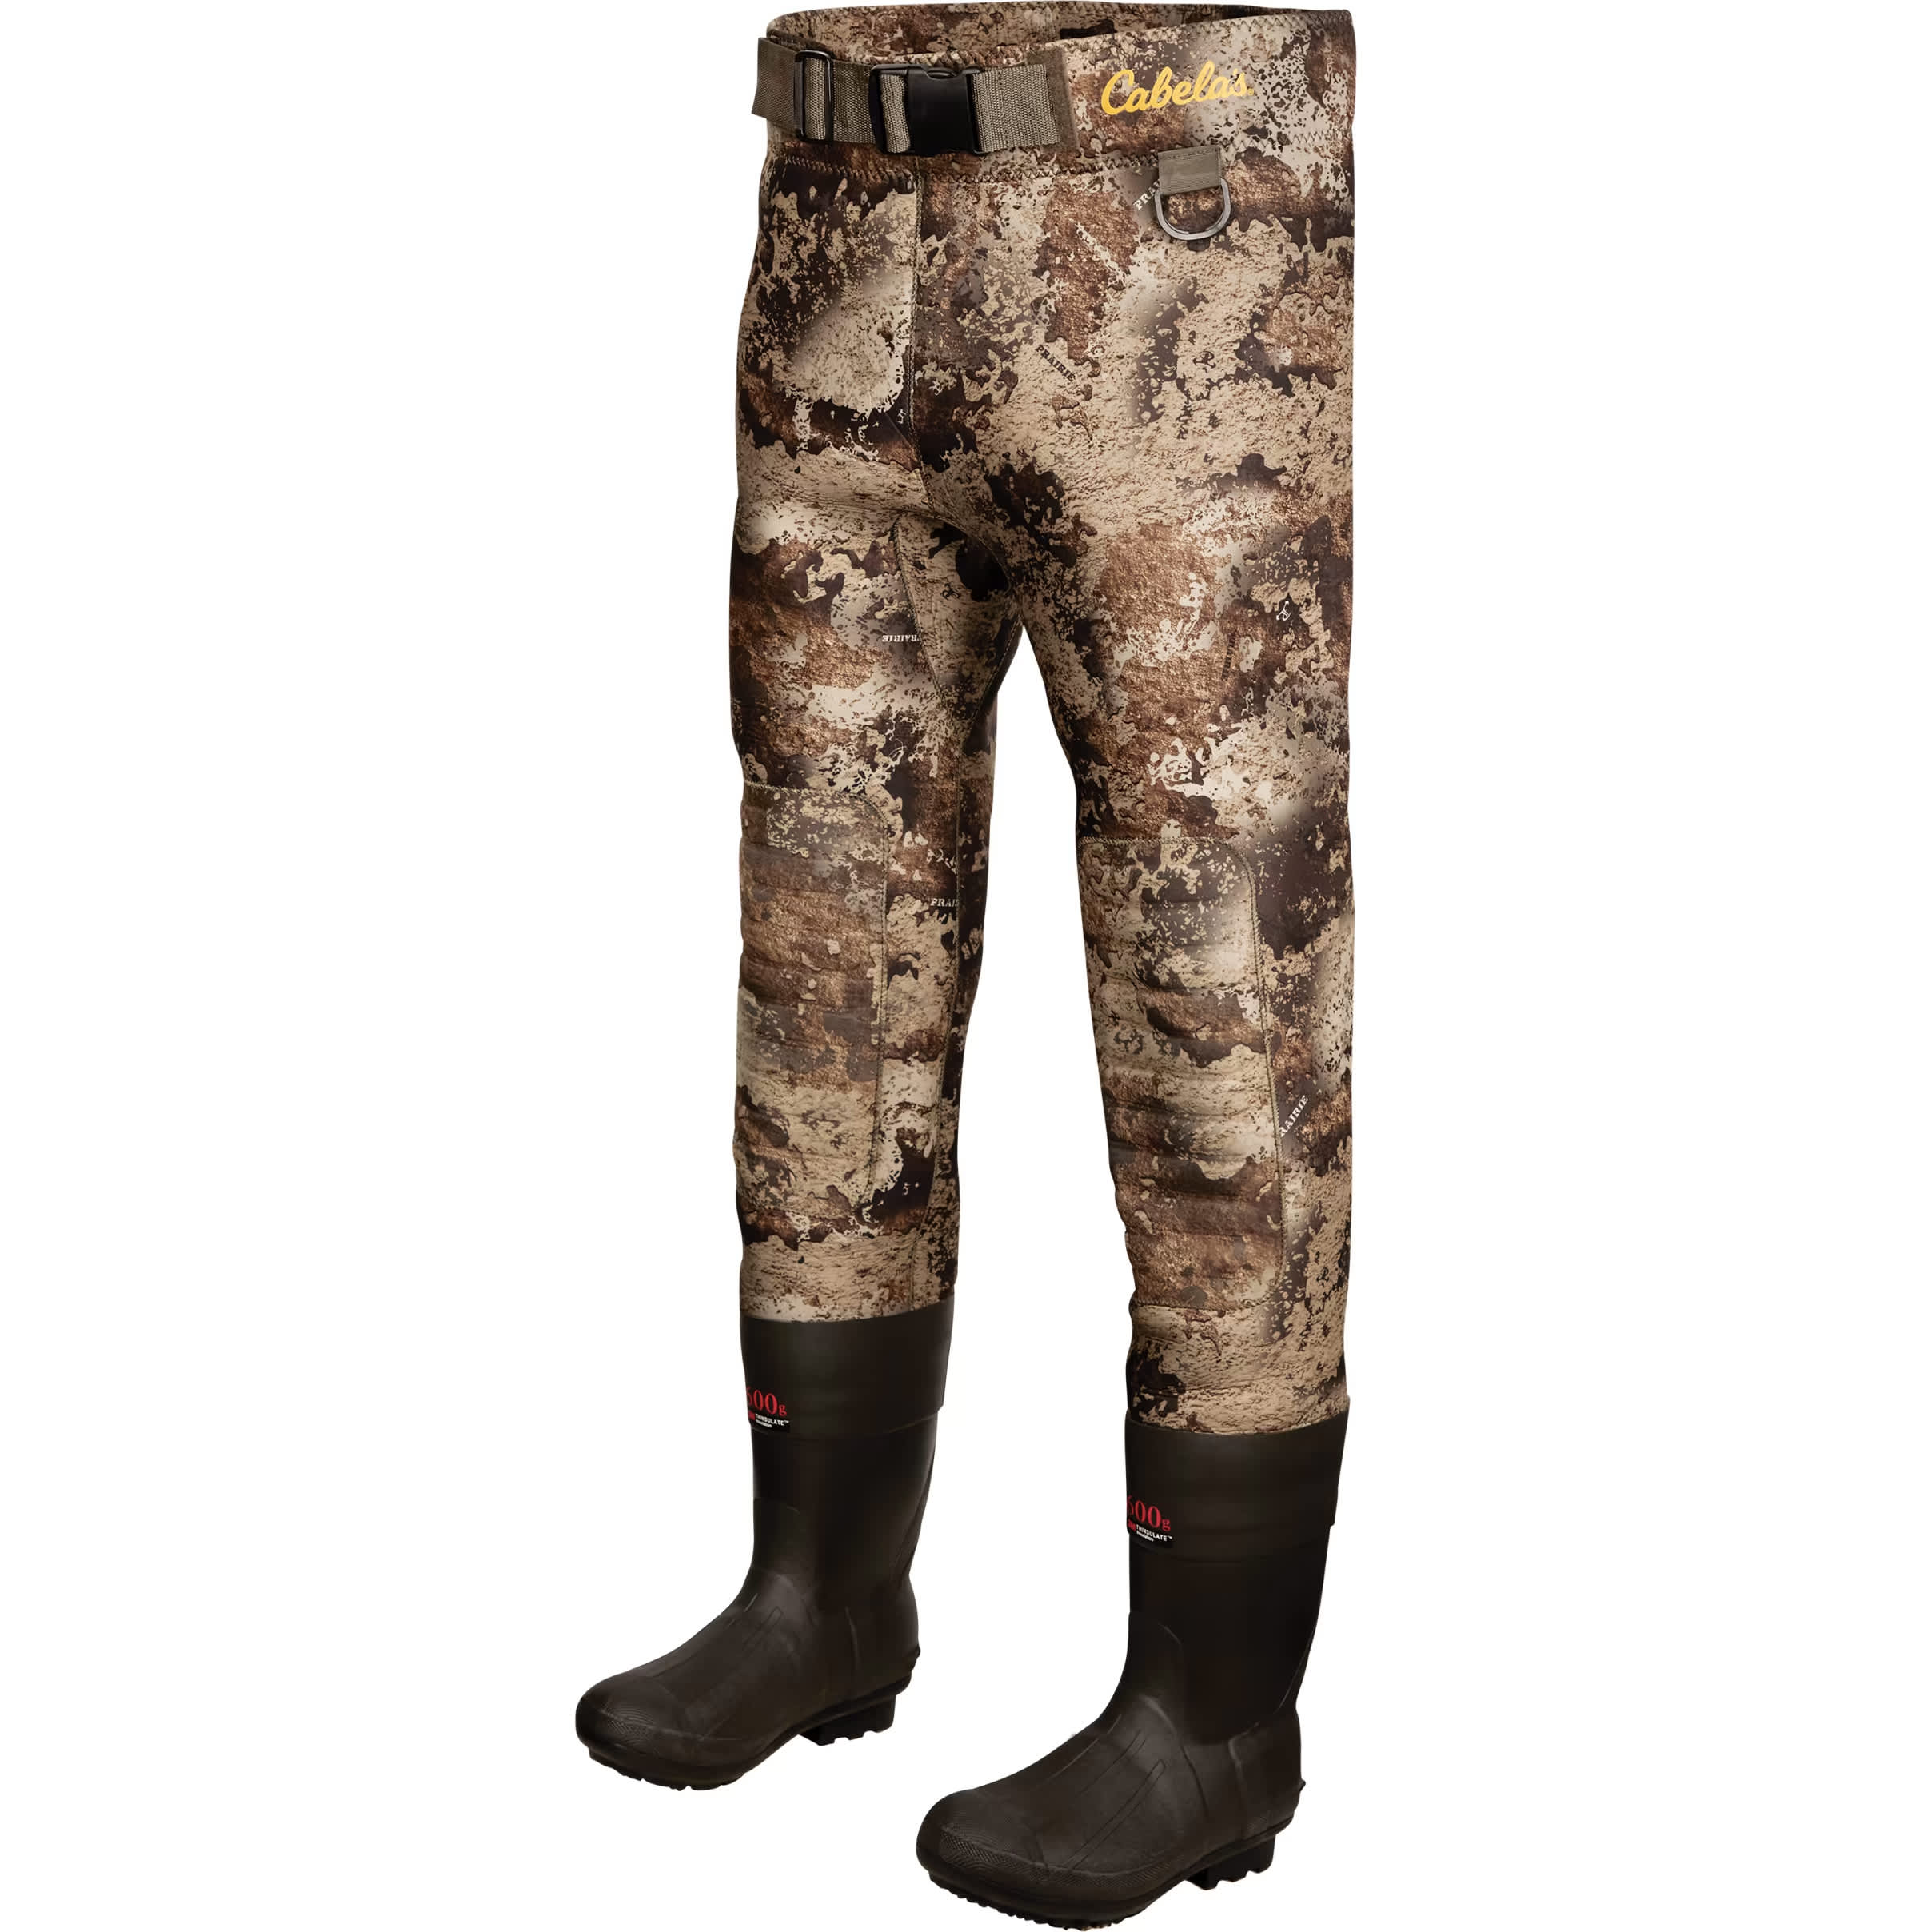 Cabela’s® Men’s Classic 3.5mm Waist High Hunting Waders